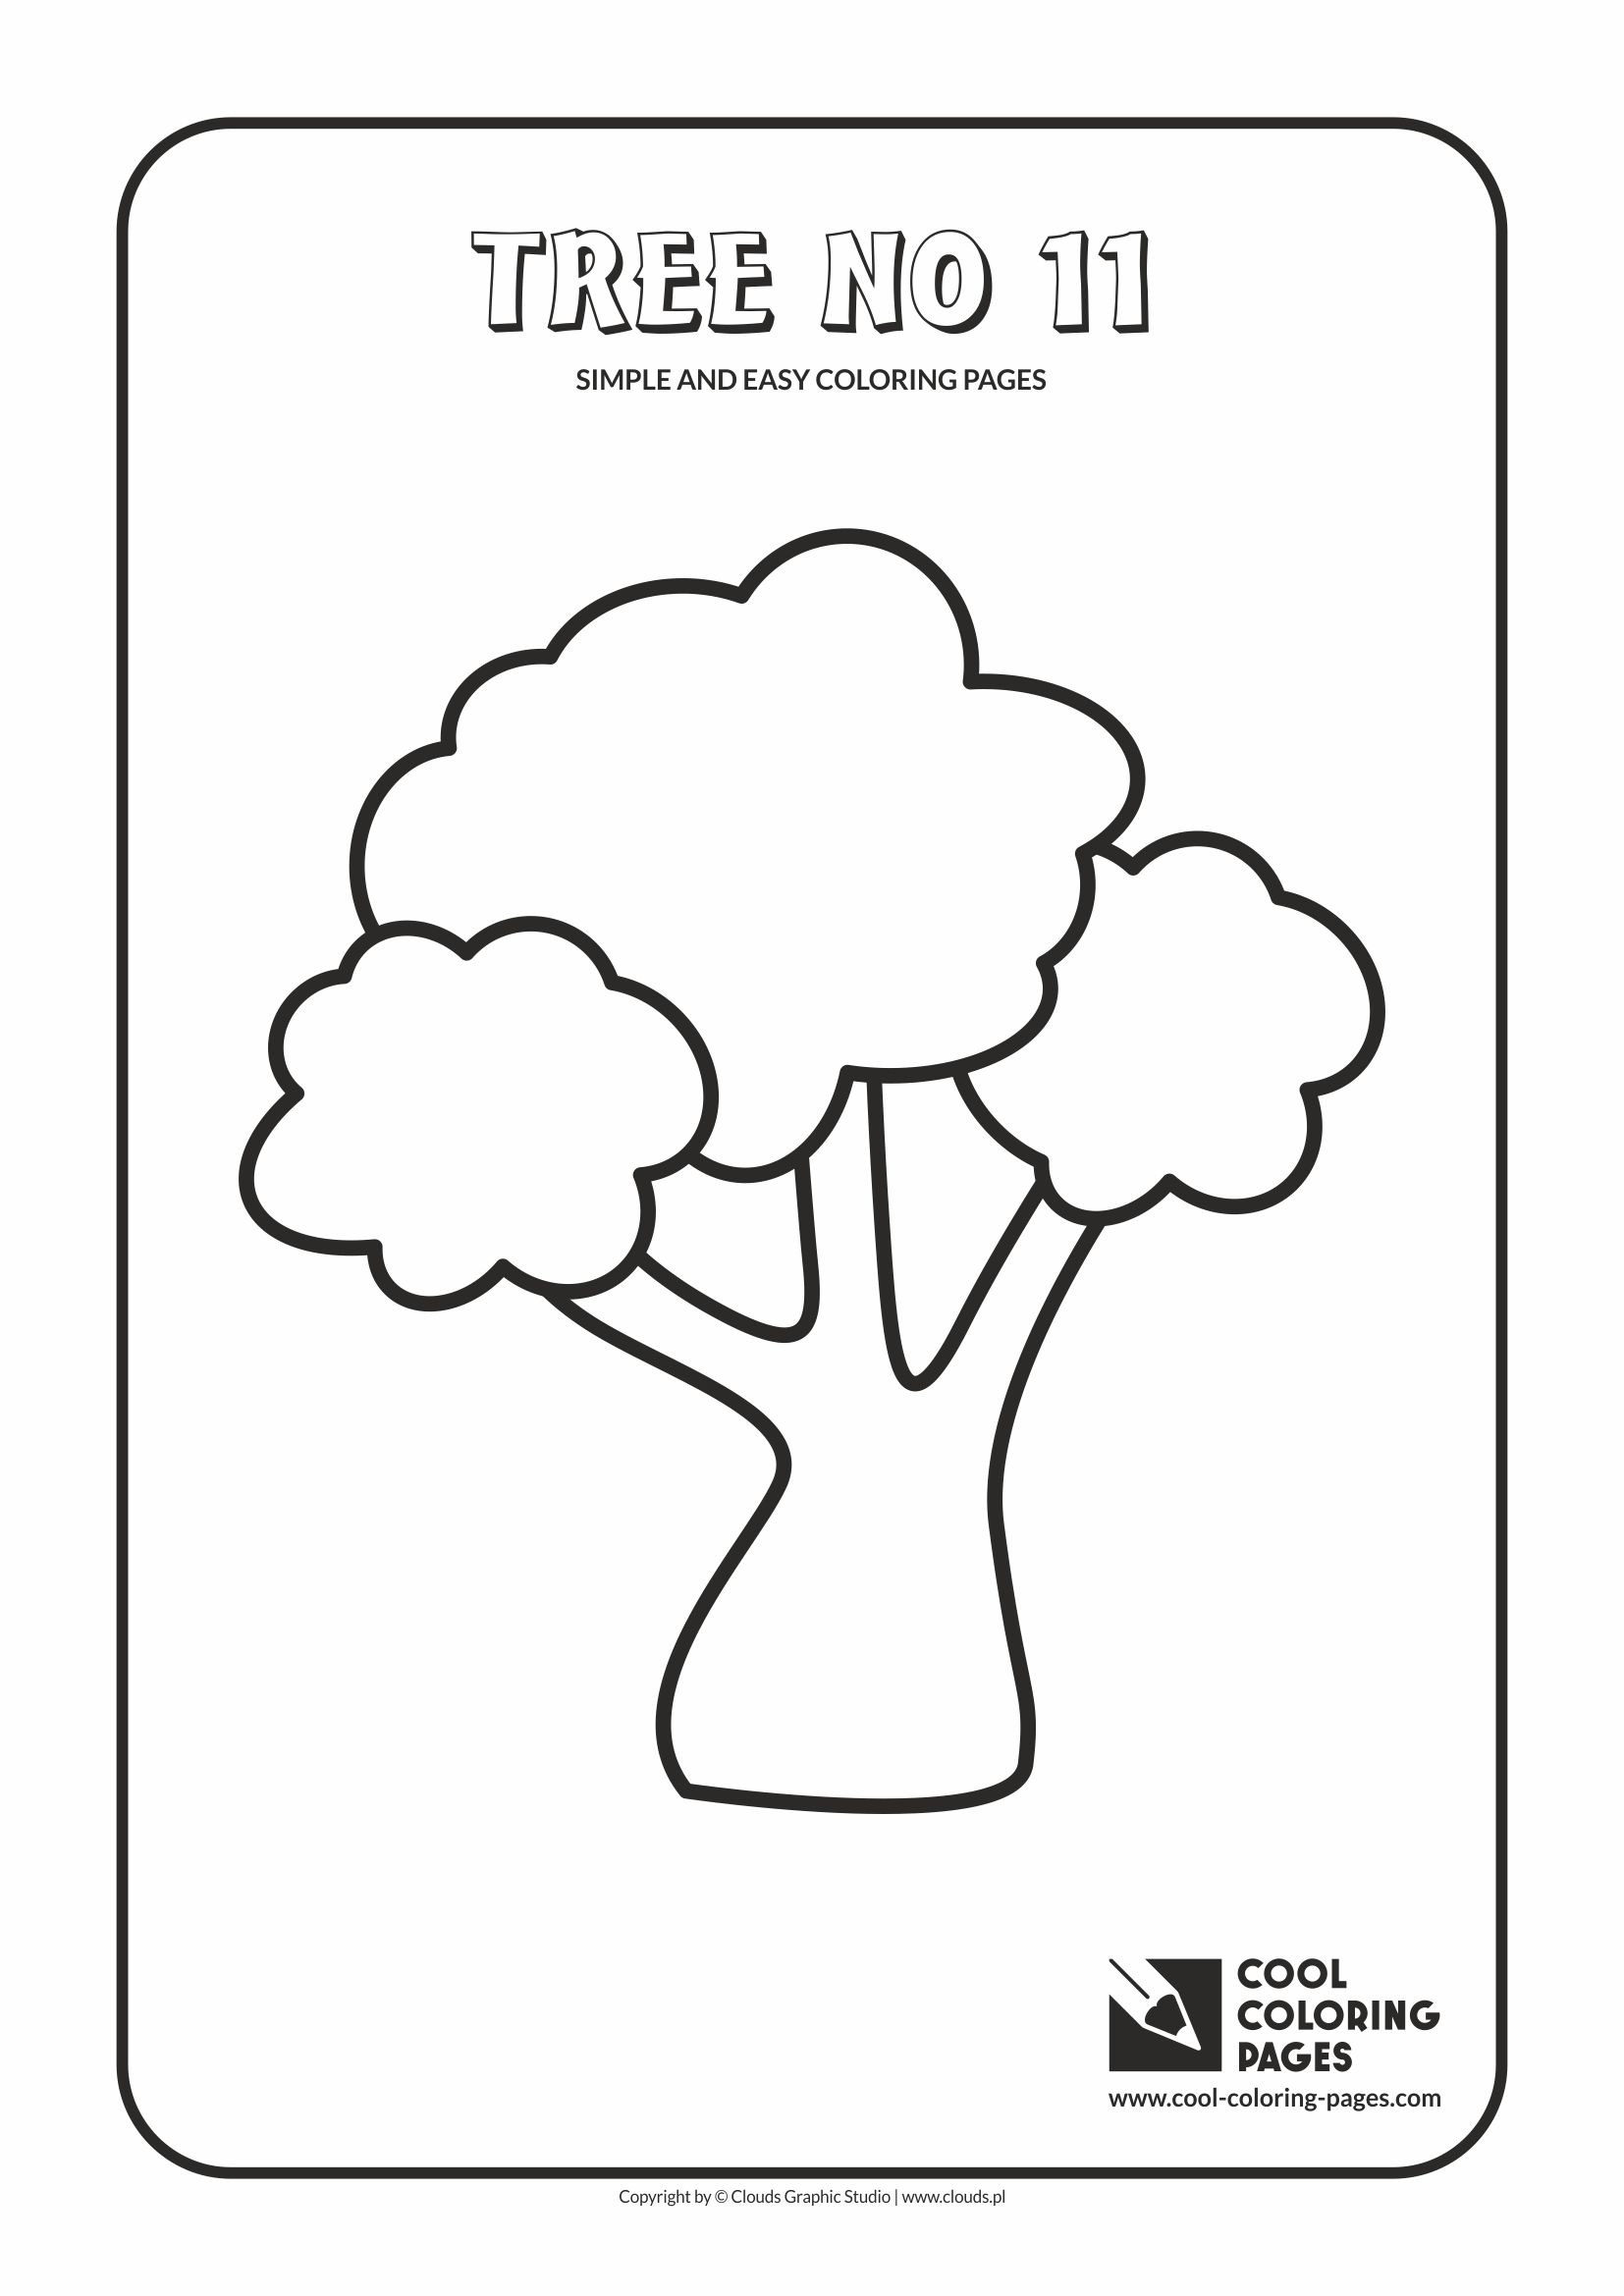 Simple and easy coloring pages for toddlers - Tree no 11